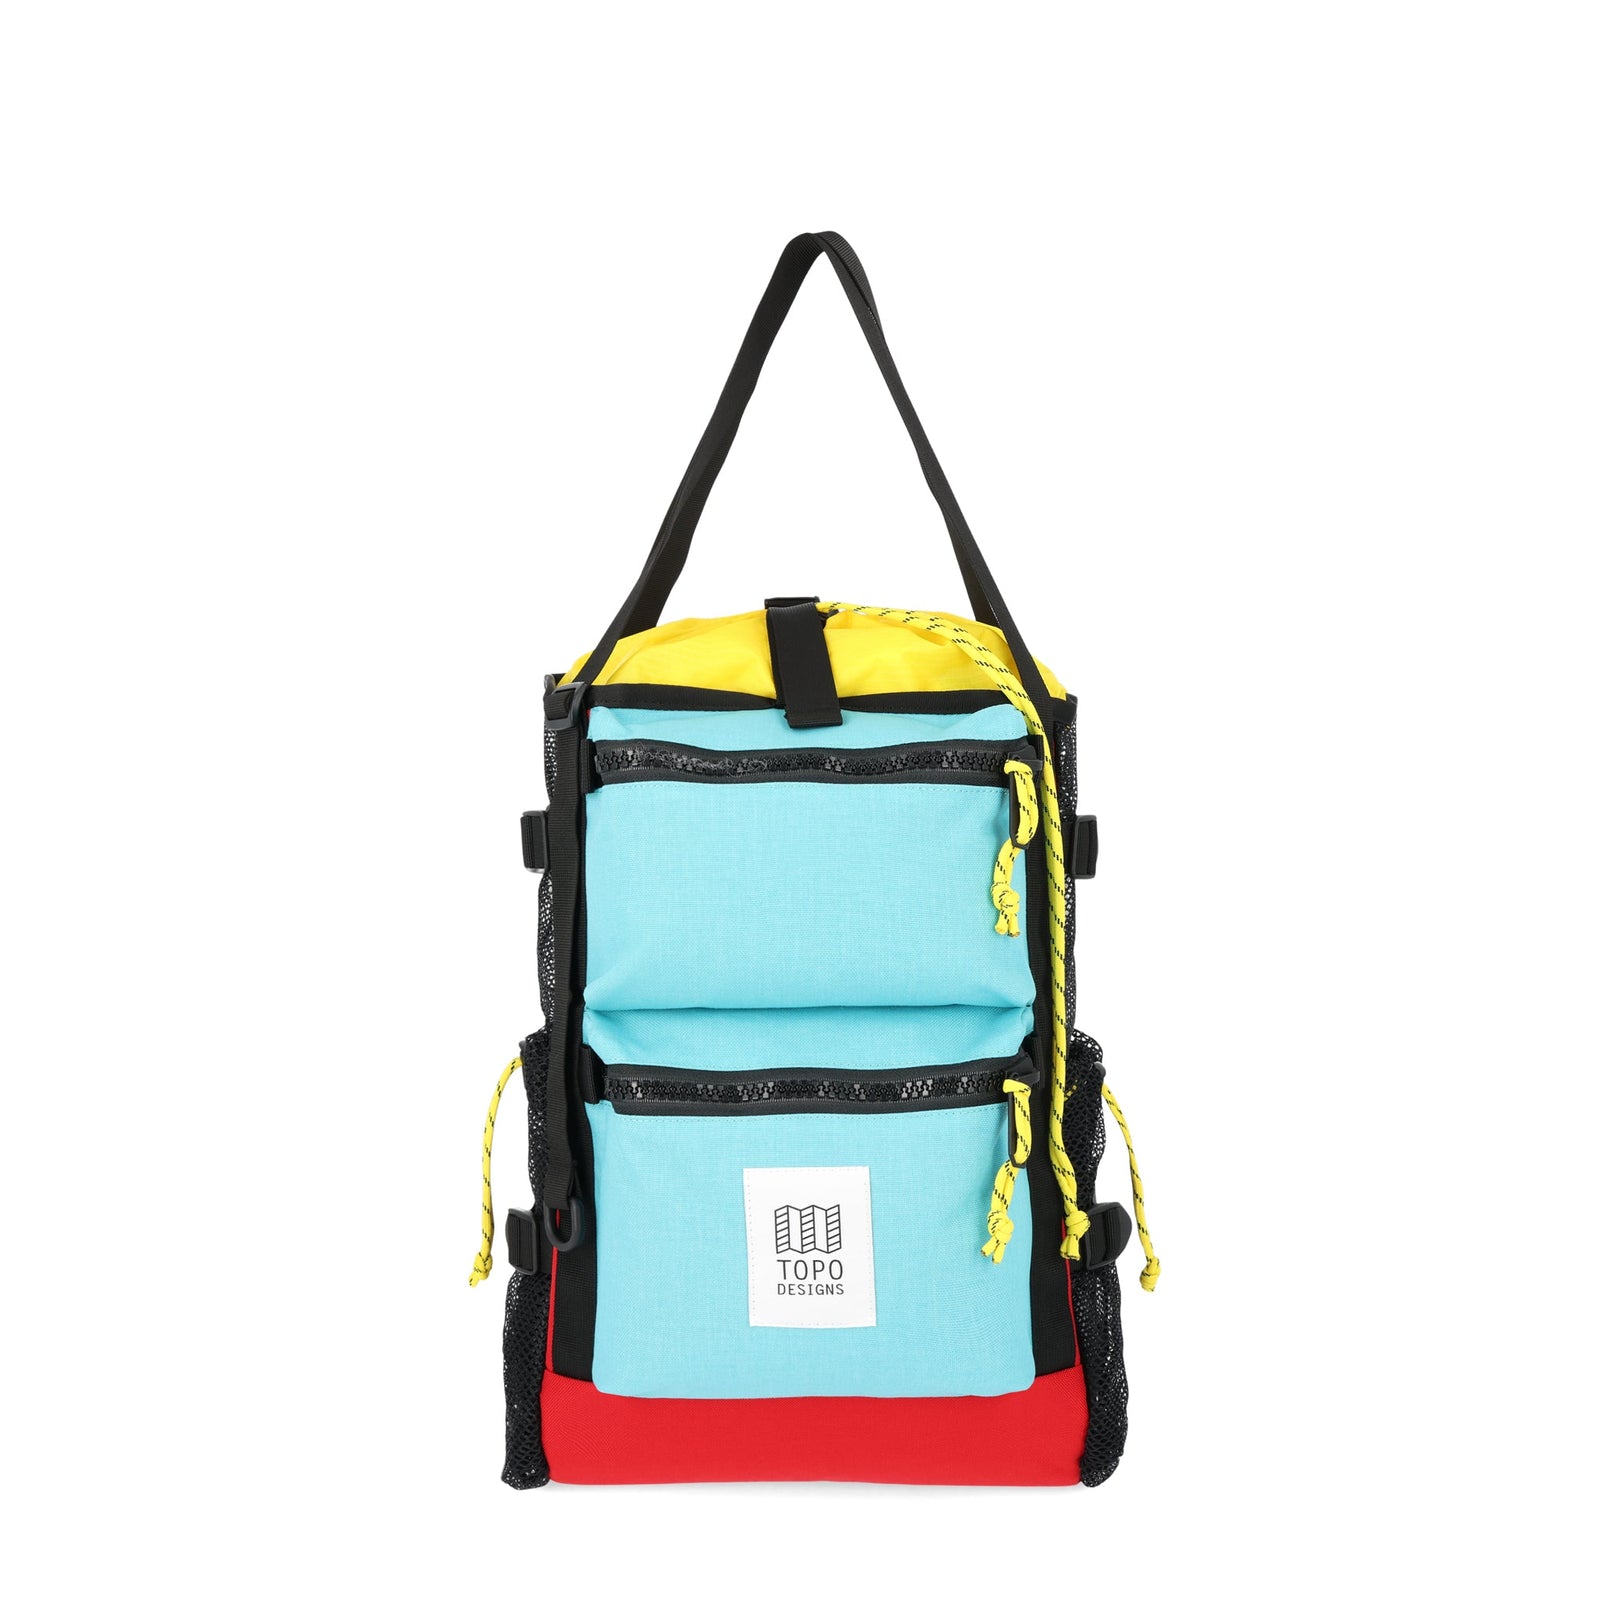 Topo Designs River Bag cinch top tote backpack with mesh sides in "Capri" blue recycled nylon.